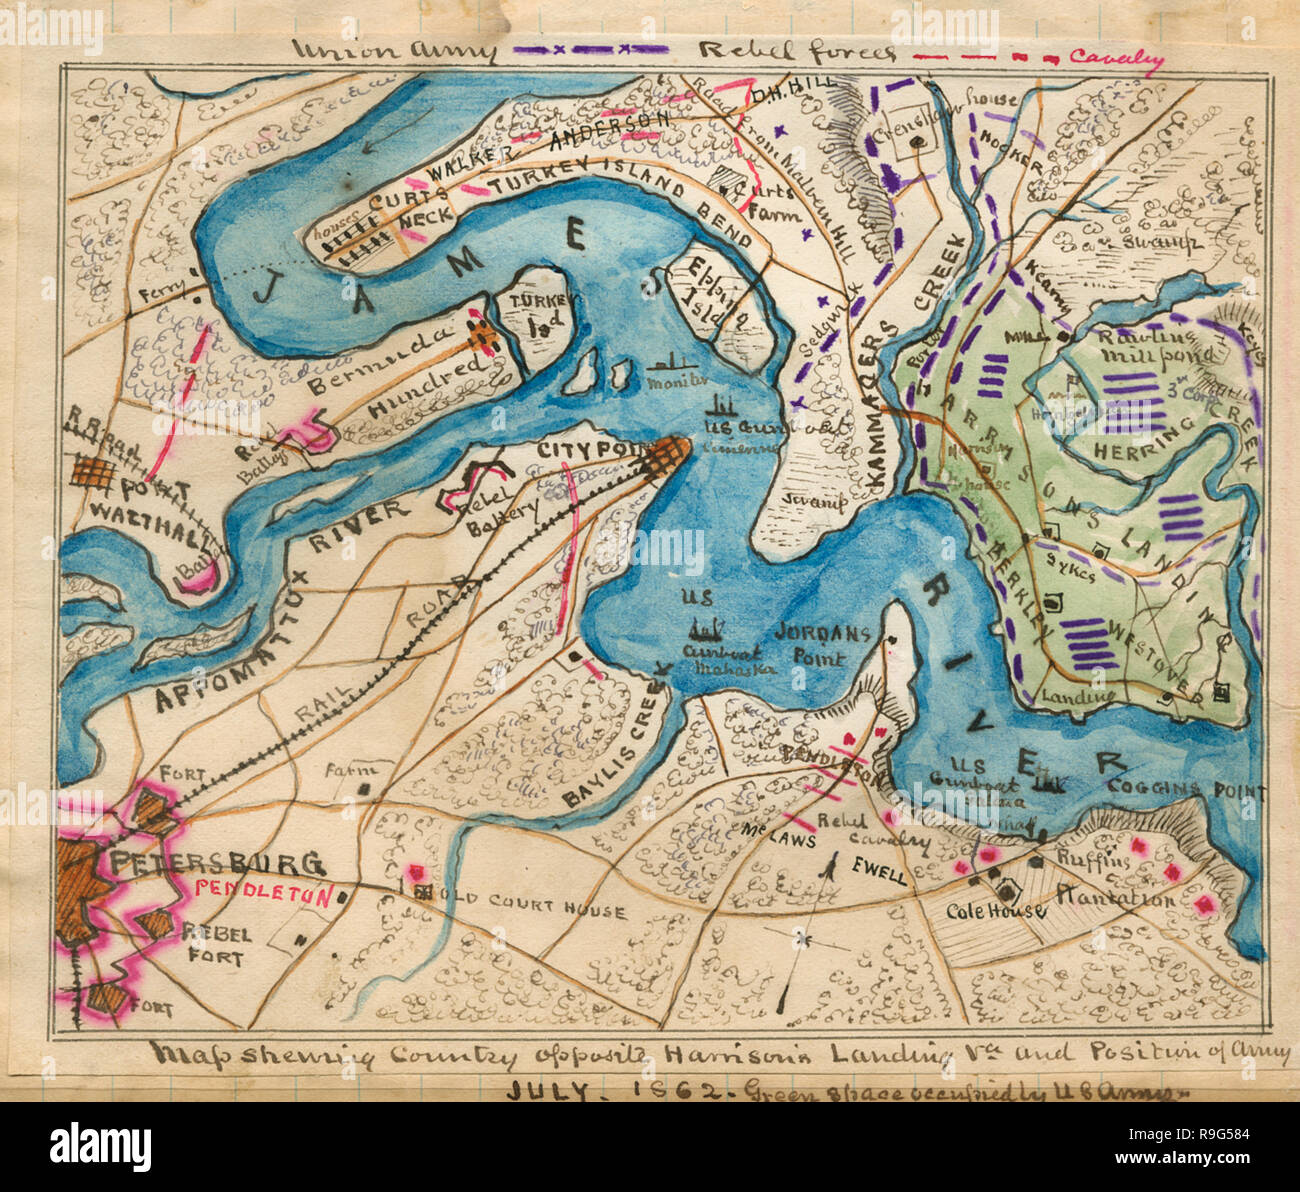 Map showing country opposite Harrison's Landing, Virginia, and position of Union Army. Shows the location along the James River between Petersburg and Harrison's Landing, Va., of the camps of the U.S. Army of the Potomac after the Seven Days' Battles, 26 June-1 July 1862. Positions of U.S. gunboats are indicated along the James River as well as Confederate strongholds and positions of the Cavalry. Stock Photo